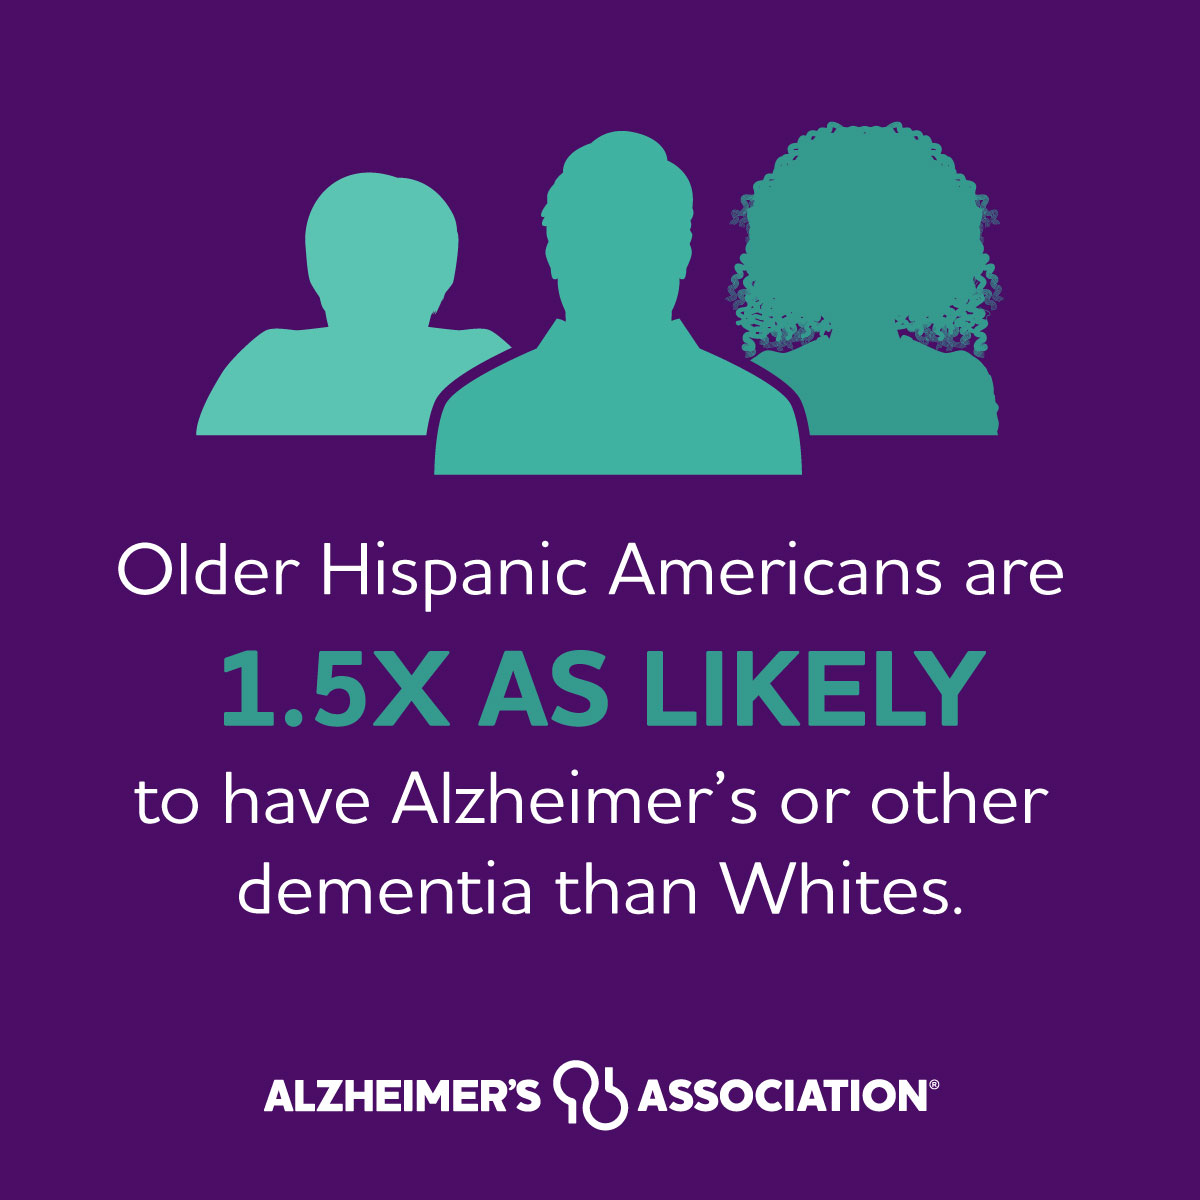 Hispanic Americans are disproportionately impacted by Alzheimer’s and other dementia. More must be done to reduce risk, including risk that stems from structural racism. Share the facts to raise awareness. alz.org/facts #AlzheimersInAmerica #ENDALZ